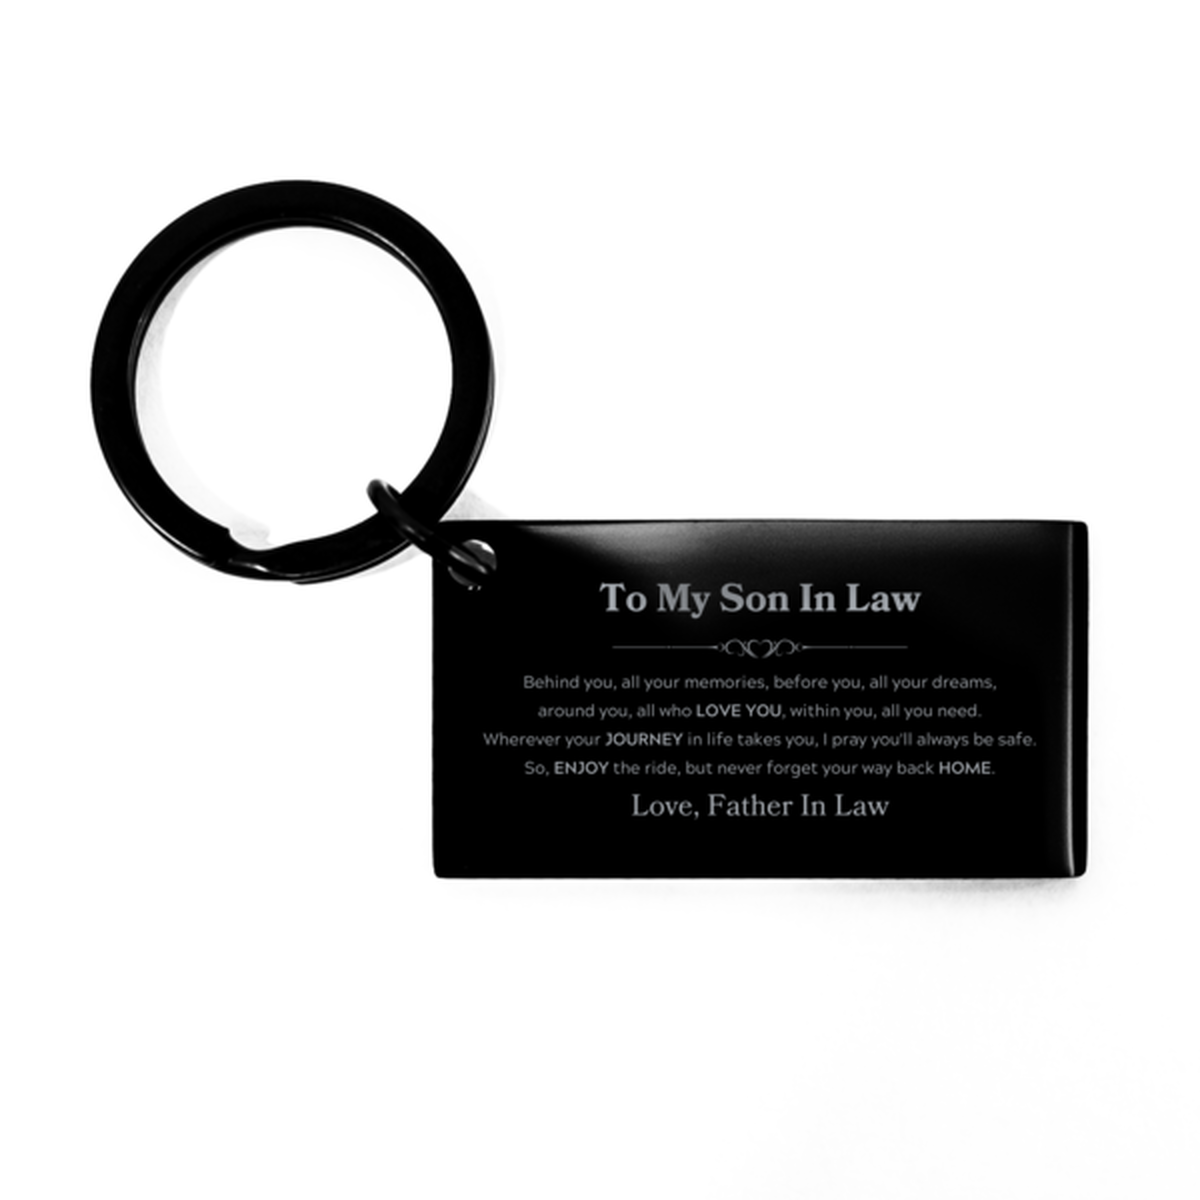 To My Son In Law Graduation Gifts from Father In Law, Son In Law Keychain Christmas Birthday Gifts for Son In Law Behind you, all your memories, before you, all your dreams. Love, Father In Law